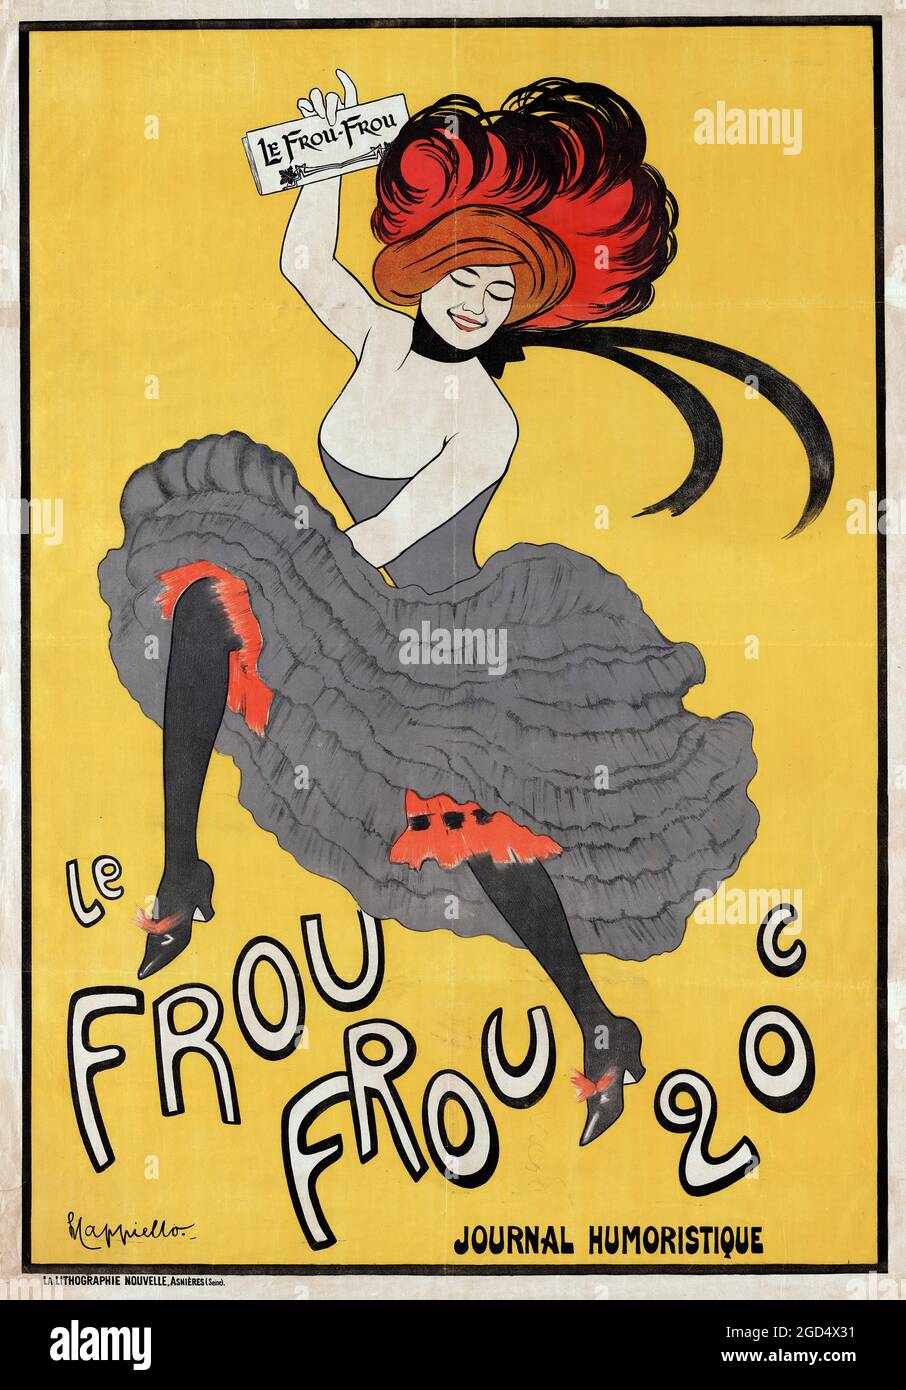 French Poster – Artwork by Leonetto Cappiello. Le Frou Frou 20', journal humoristique. Can-can dancer. 1899. Belle époque poster. Stock Photo